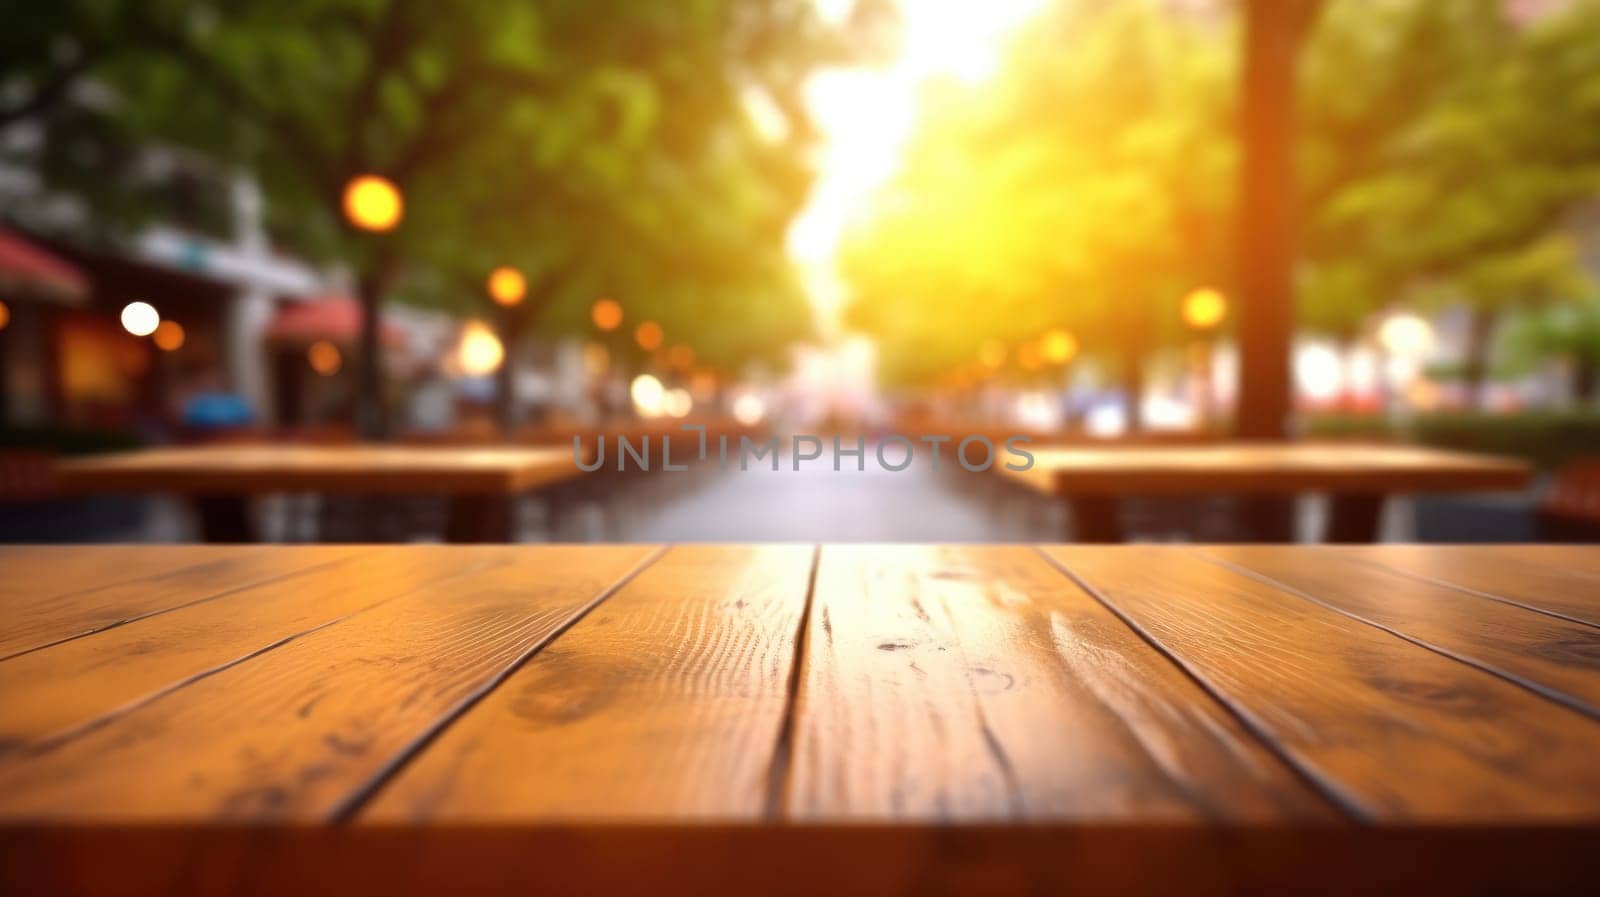 The empty wooden table top with blur background of outdoor cafe in the morning. Exuberant image.